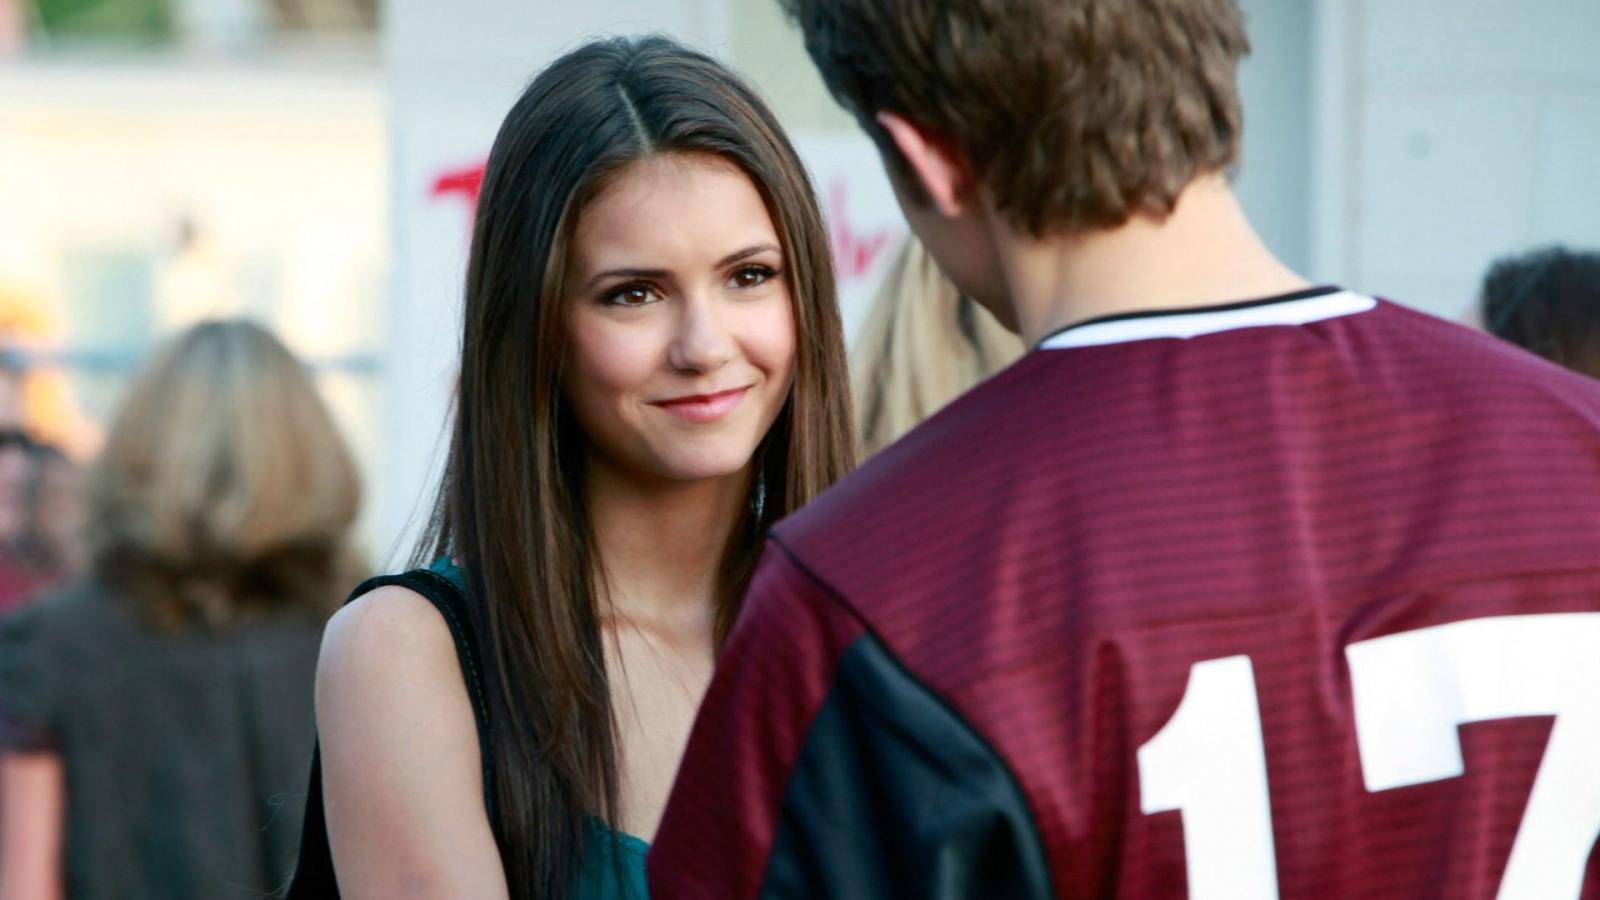 Vampire Diaries Characters vs Cast Real Age Raises Some Eyebrows - image 4